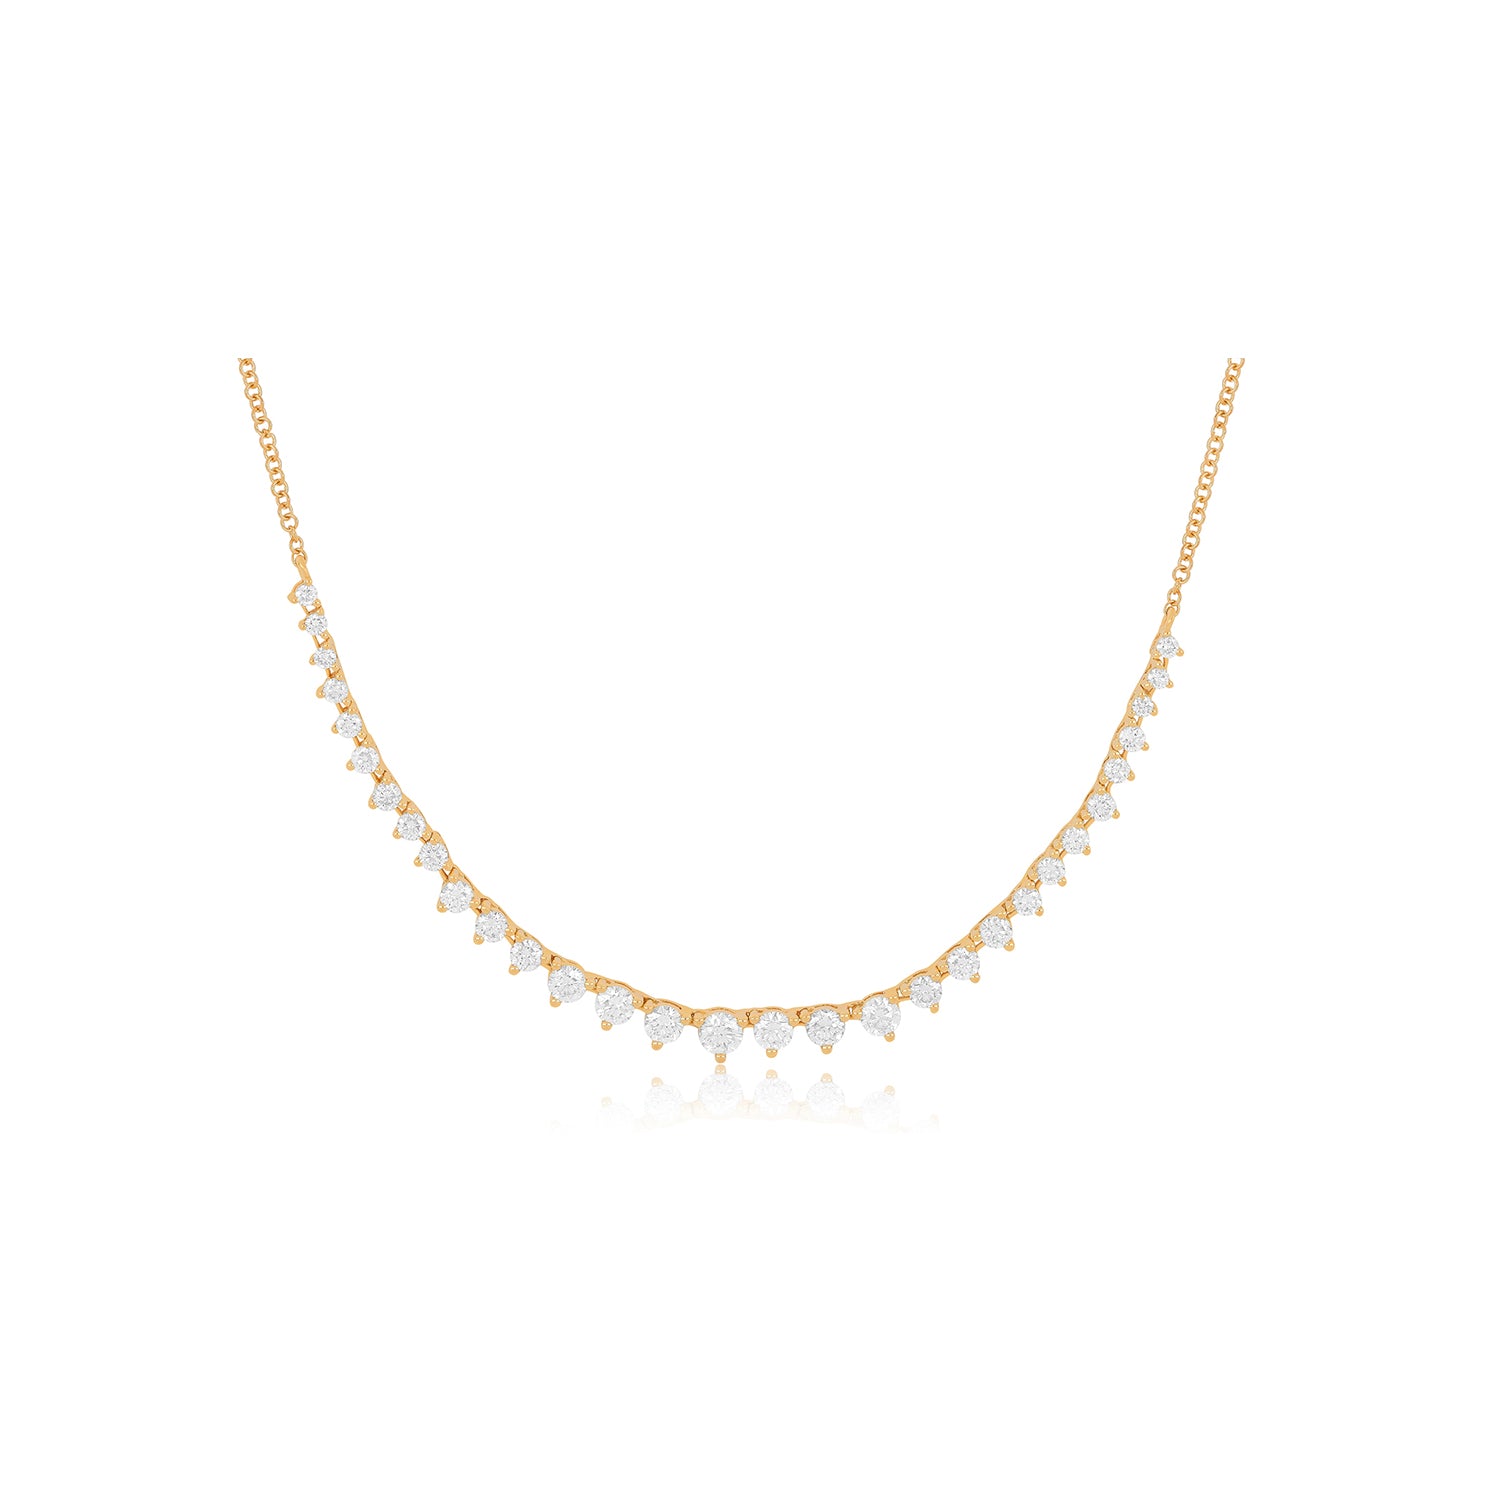 Graduated Diamond Necklace in 14k rose gold